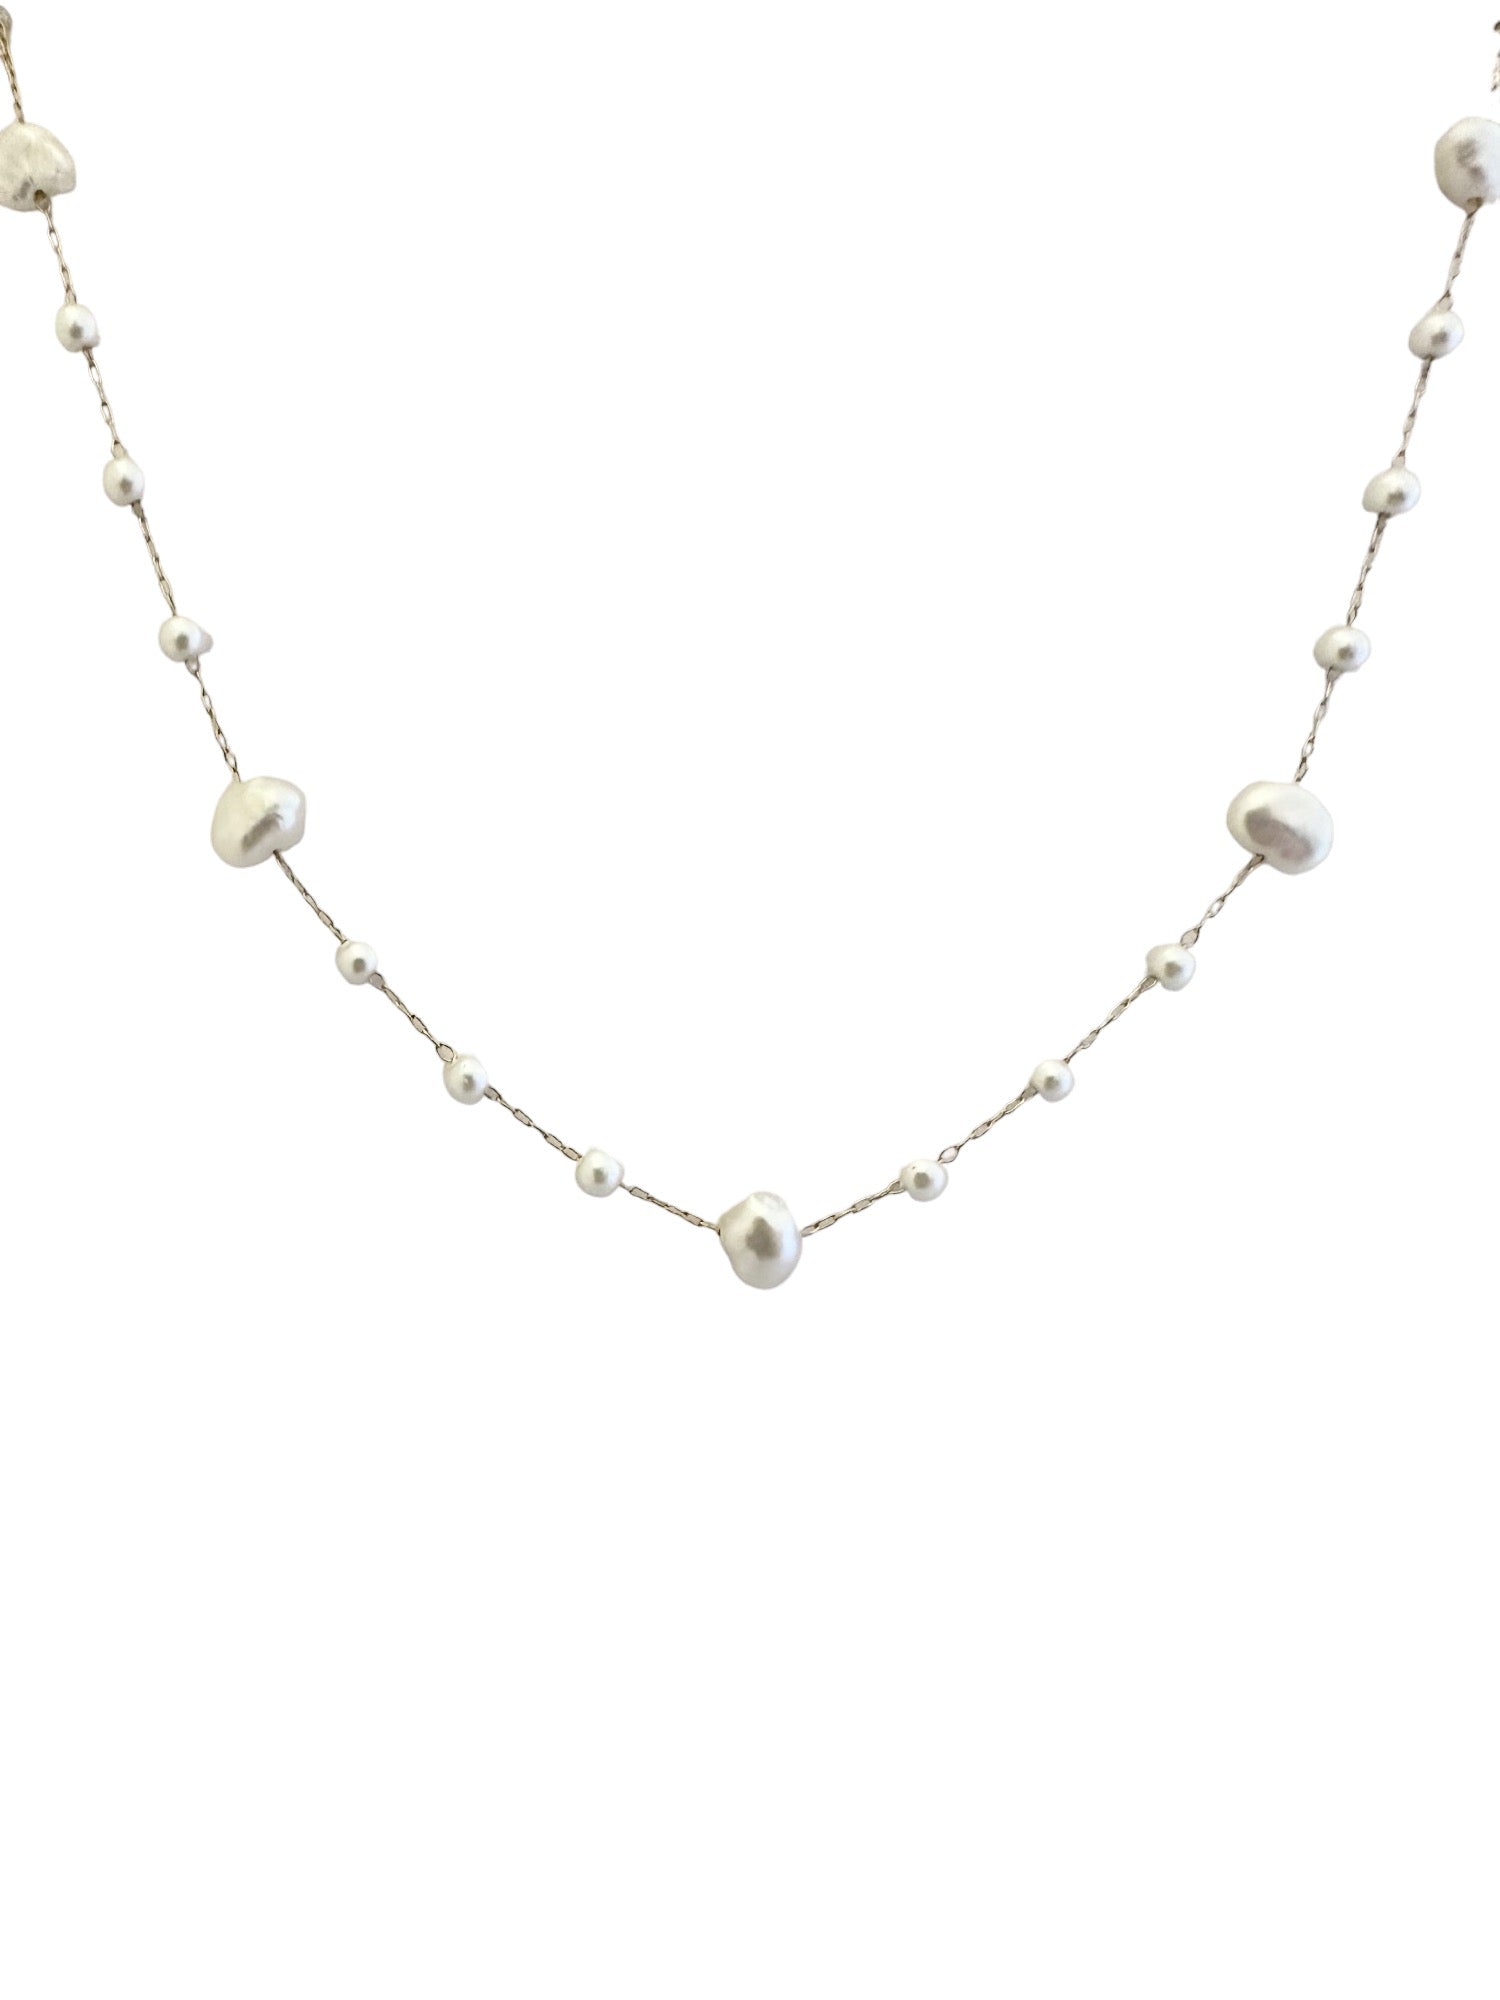 Scattered Fresh Water Pearl Necklace